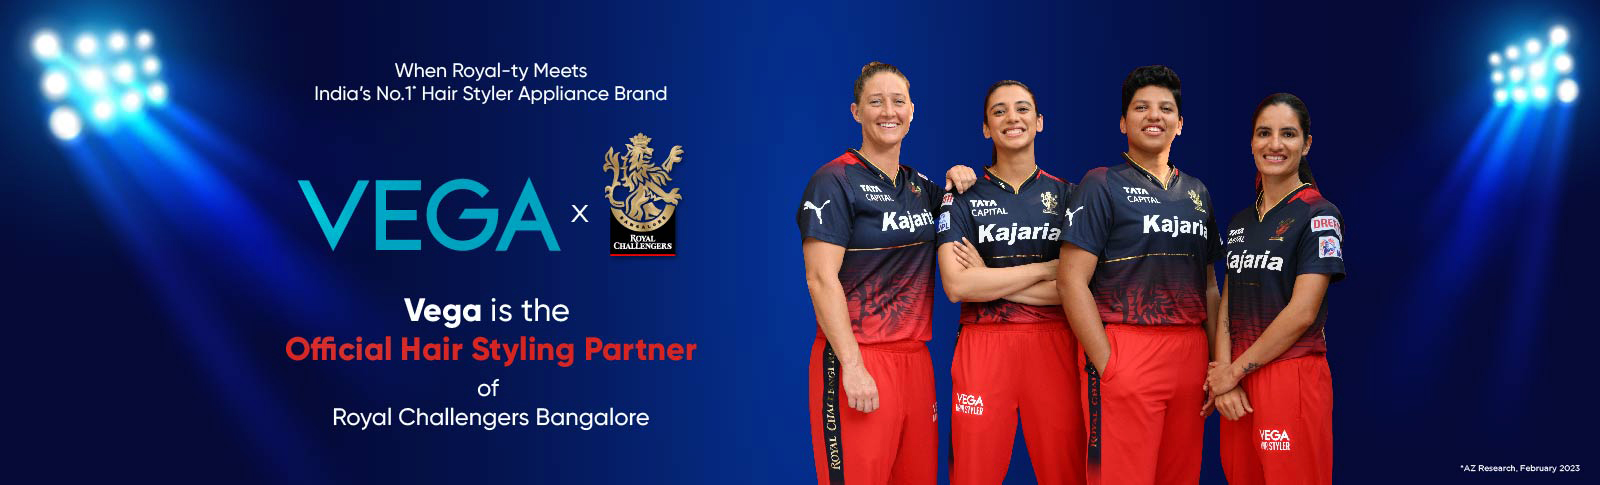 Vega is the Official Hair Styling Partner of Royal Challengers Bangalore